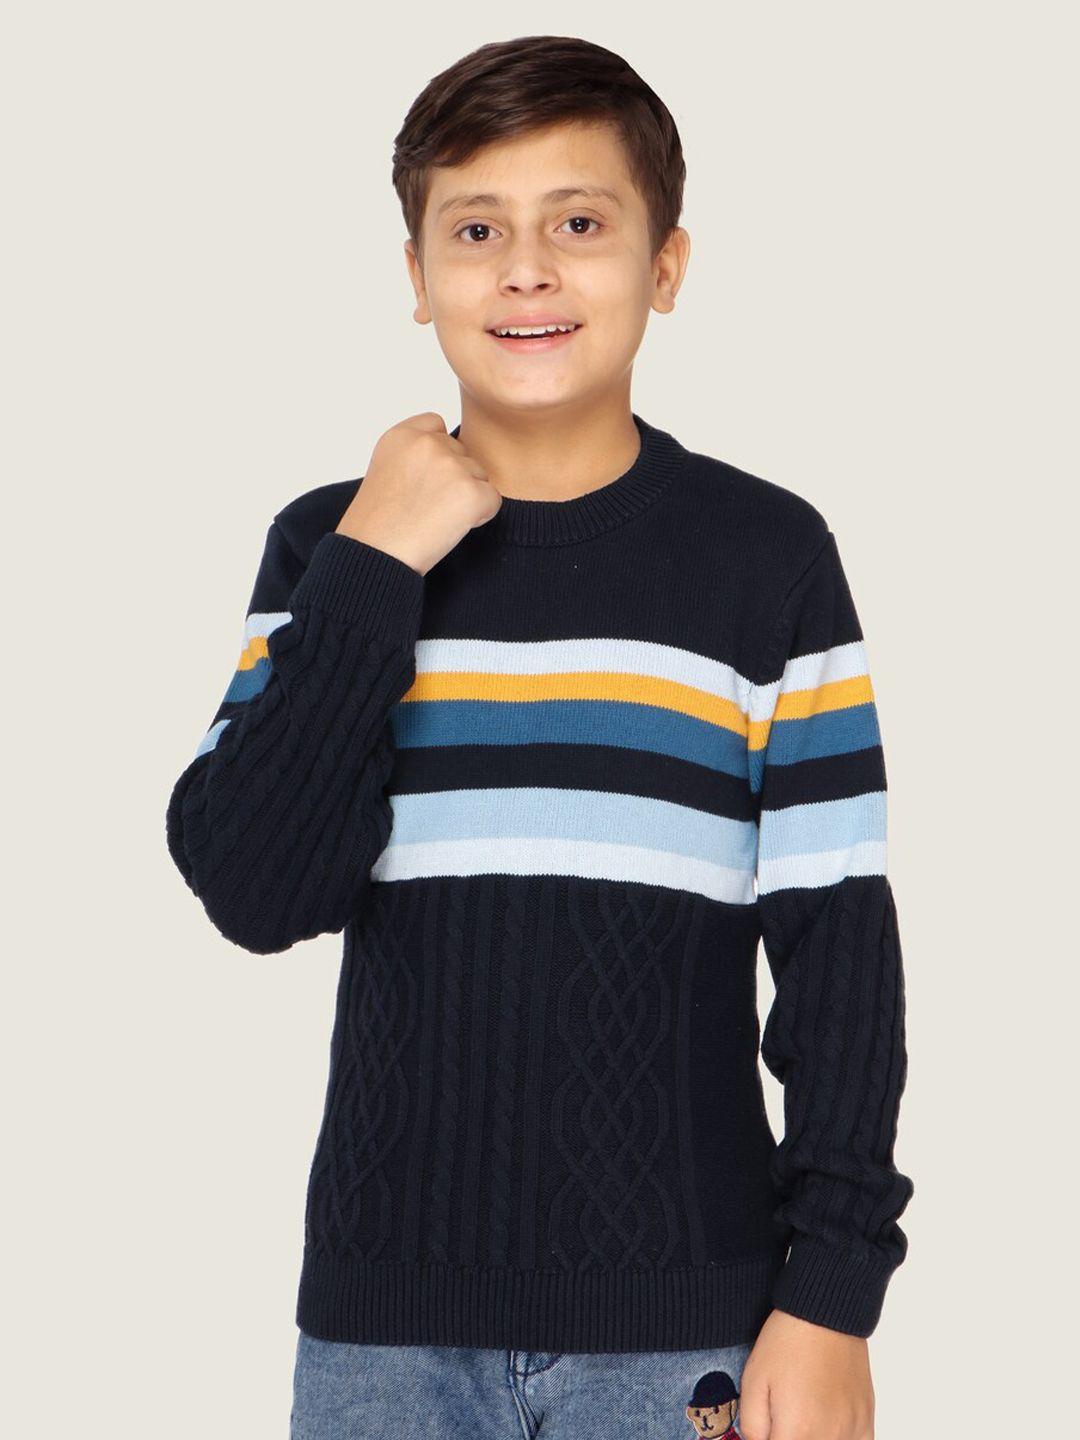 lasnak boys navy blue & white striped cotton pullover sweater